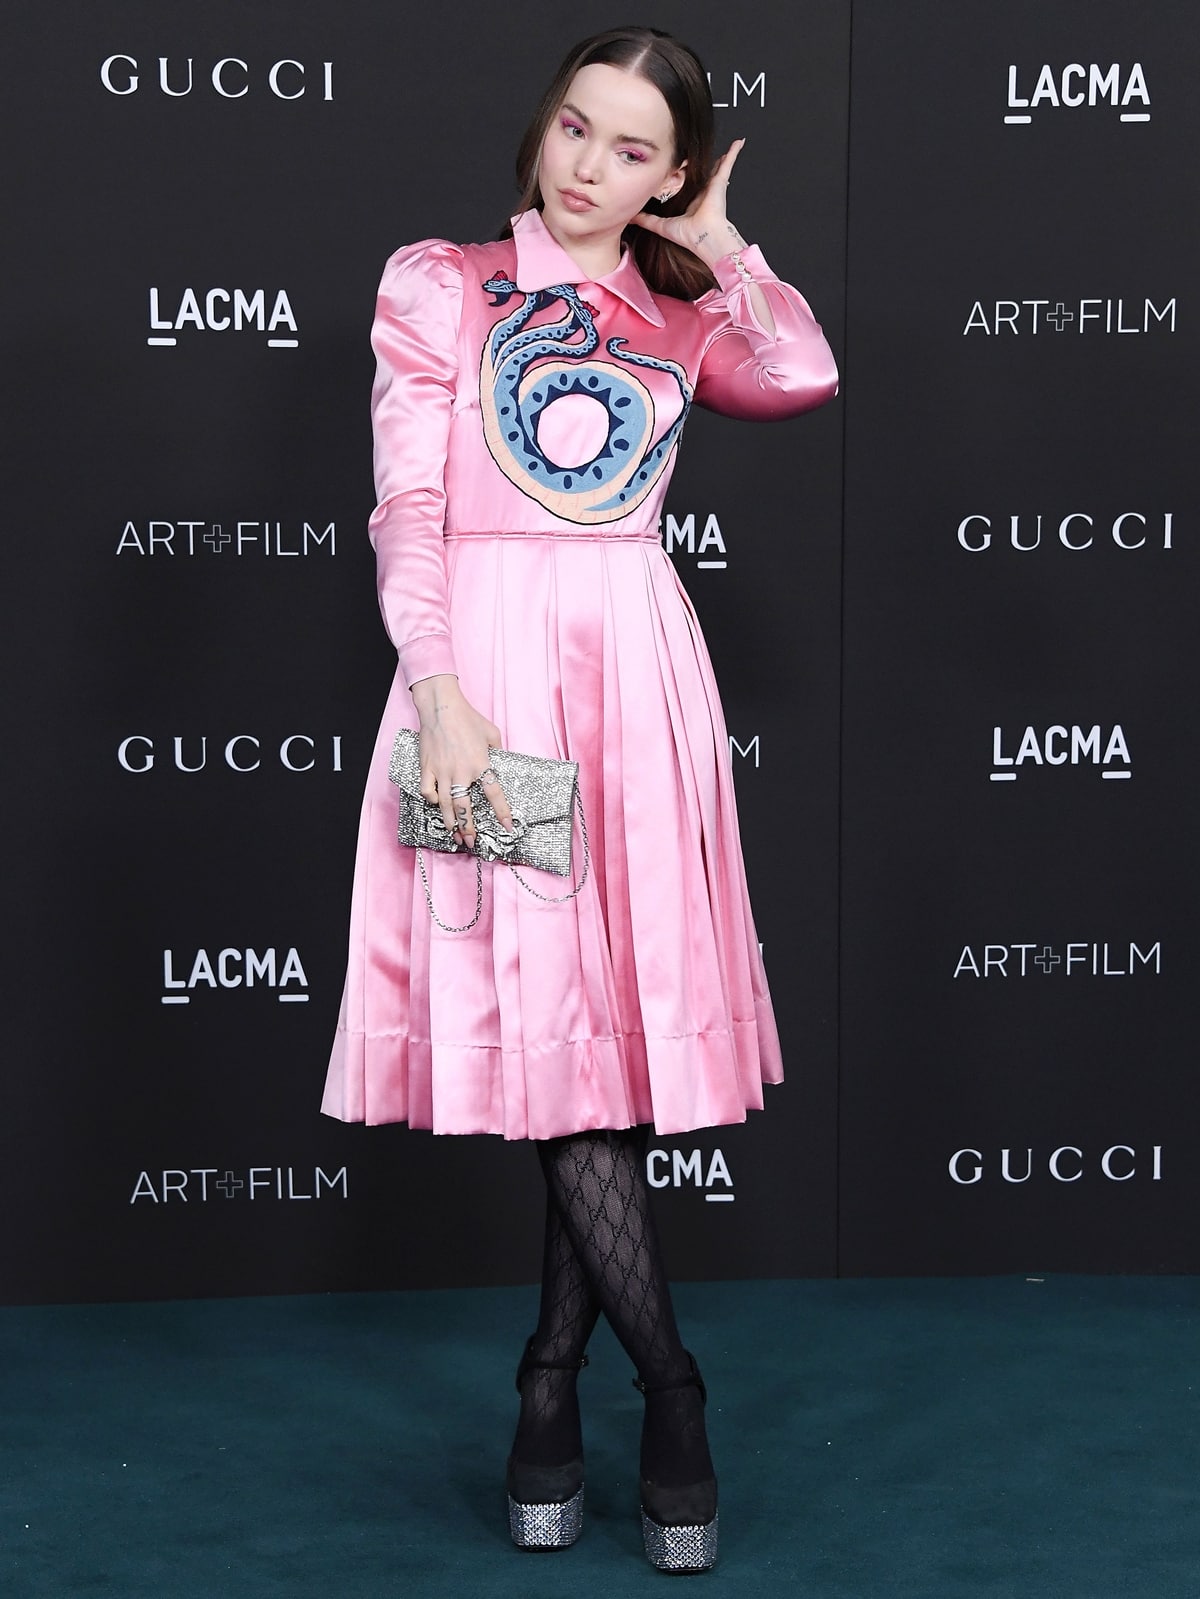 Dove Cameron paired a Gucci dress with black stockings and Giuseppe Zanotti crystal-embellished platform sandals at the 2021 LACMA Art + Film Gala